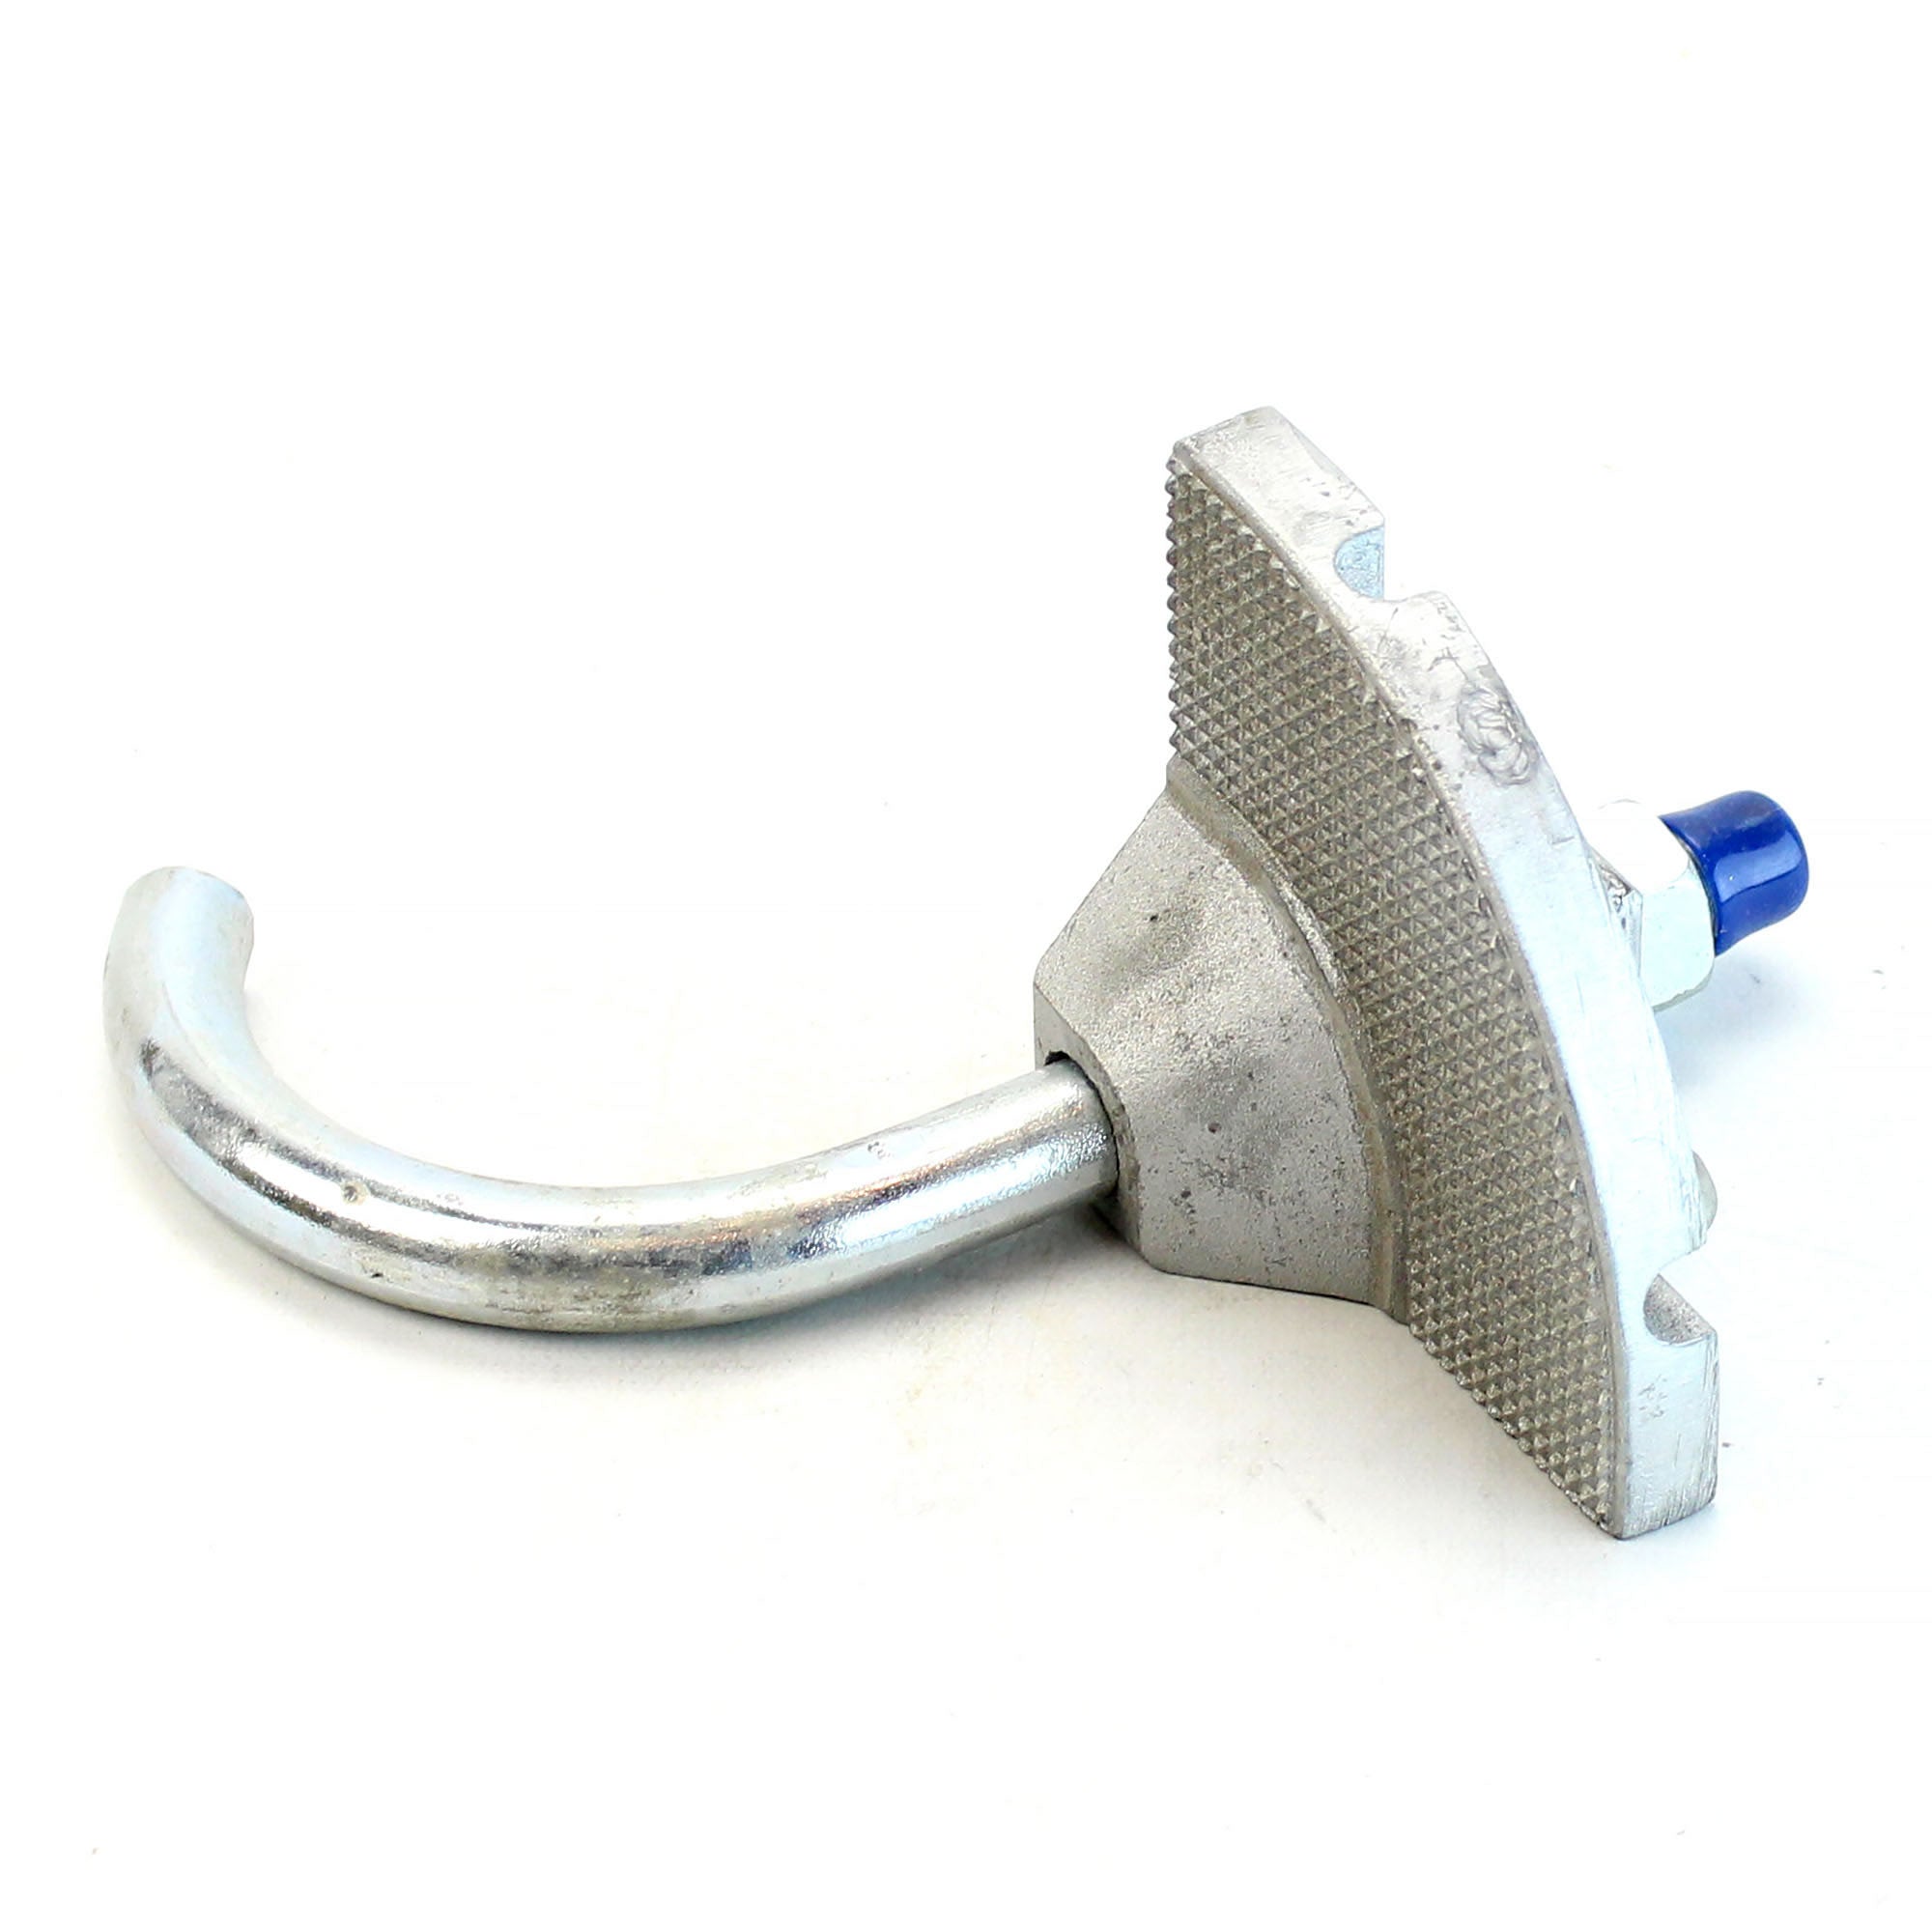 Crouse Hinds, COOPER CROUSE-HINDS LCCF010 CABLE TRAY CONDUIT CLAMP CONDUIT, INSIDE RAIL, 4"